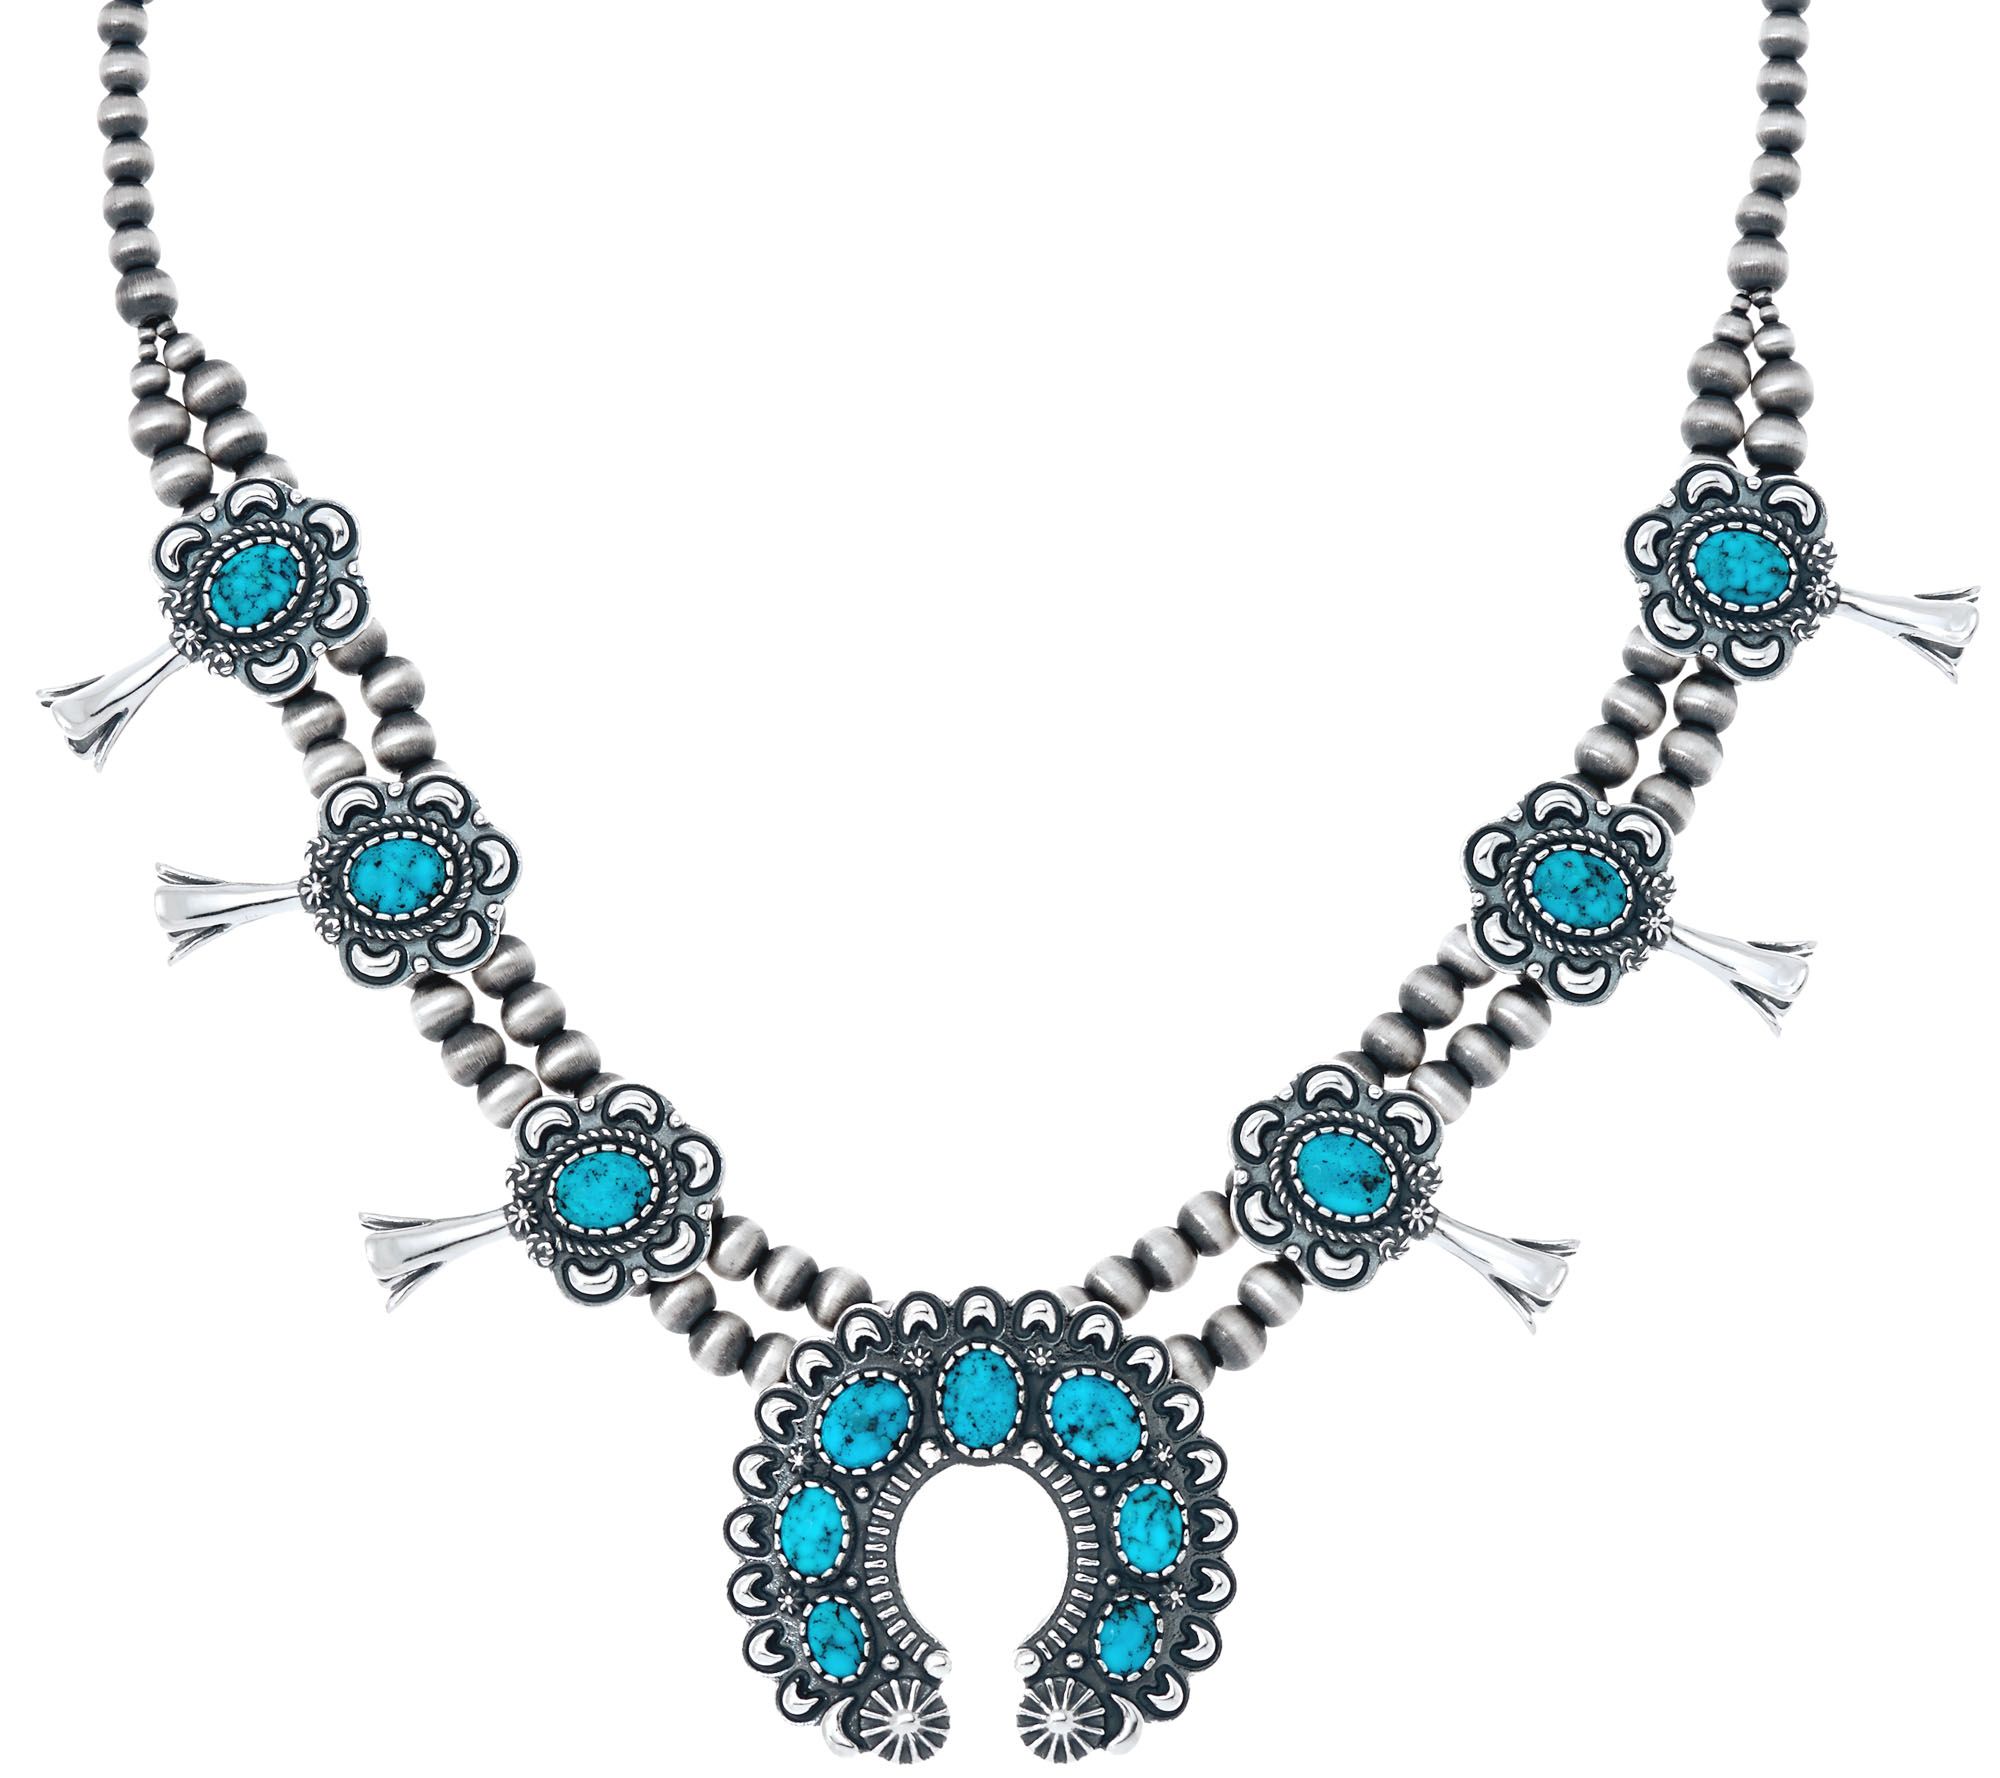 kingman spiderweb turquoise necklace by american west - page 1 - qvc.com NEWNUEK